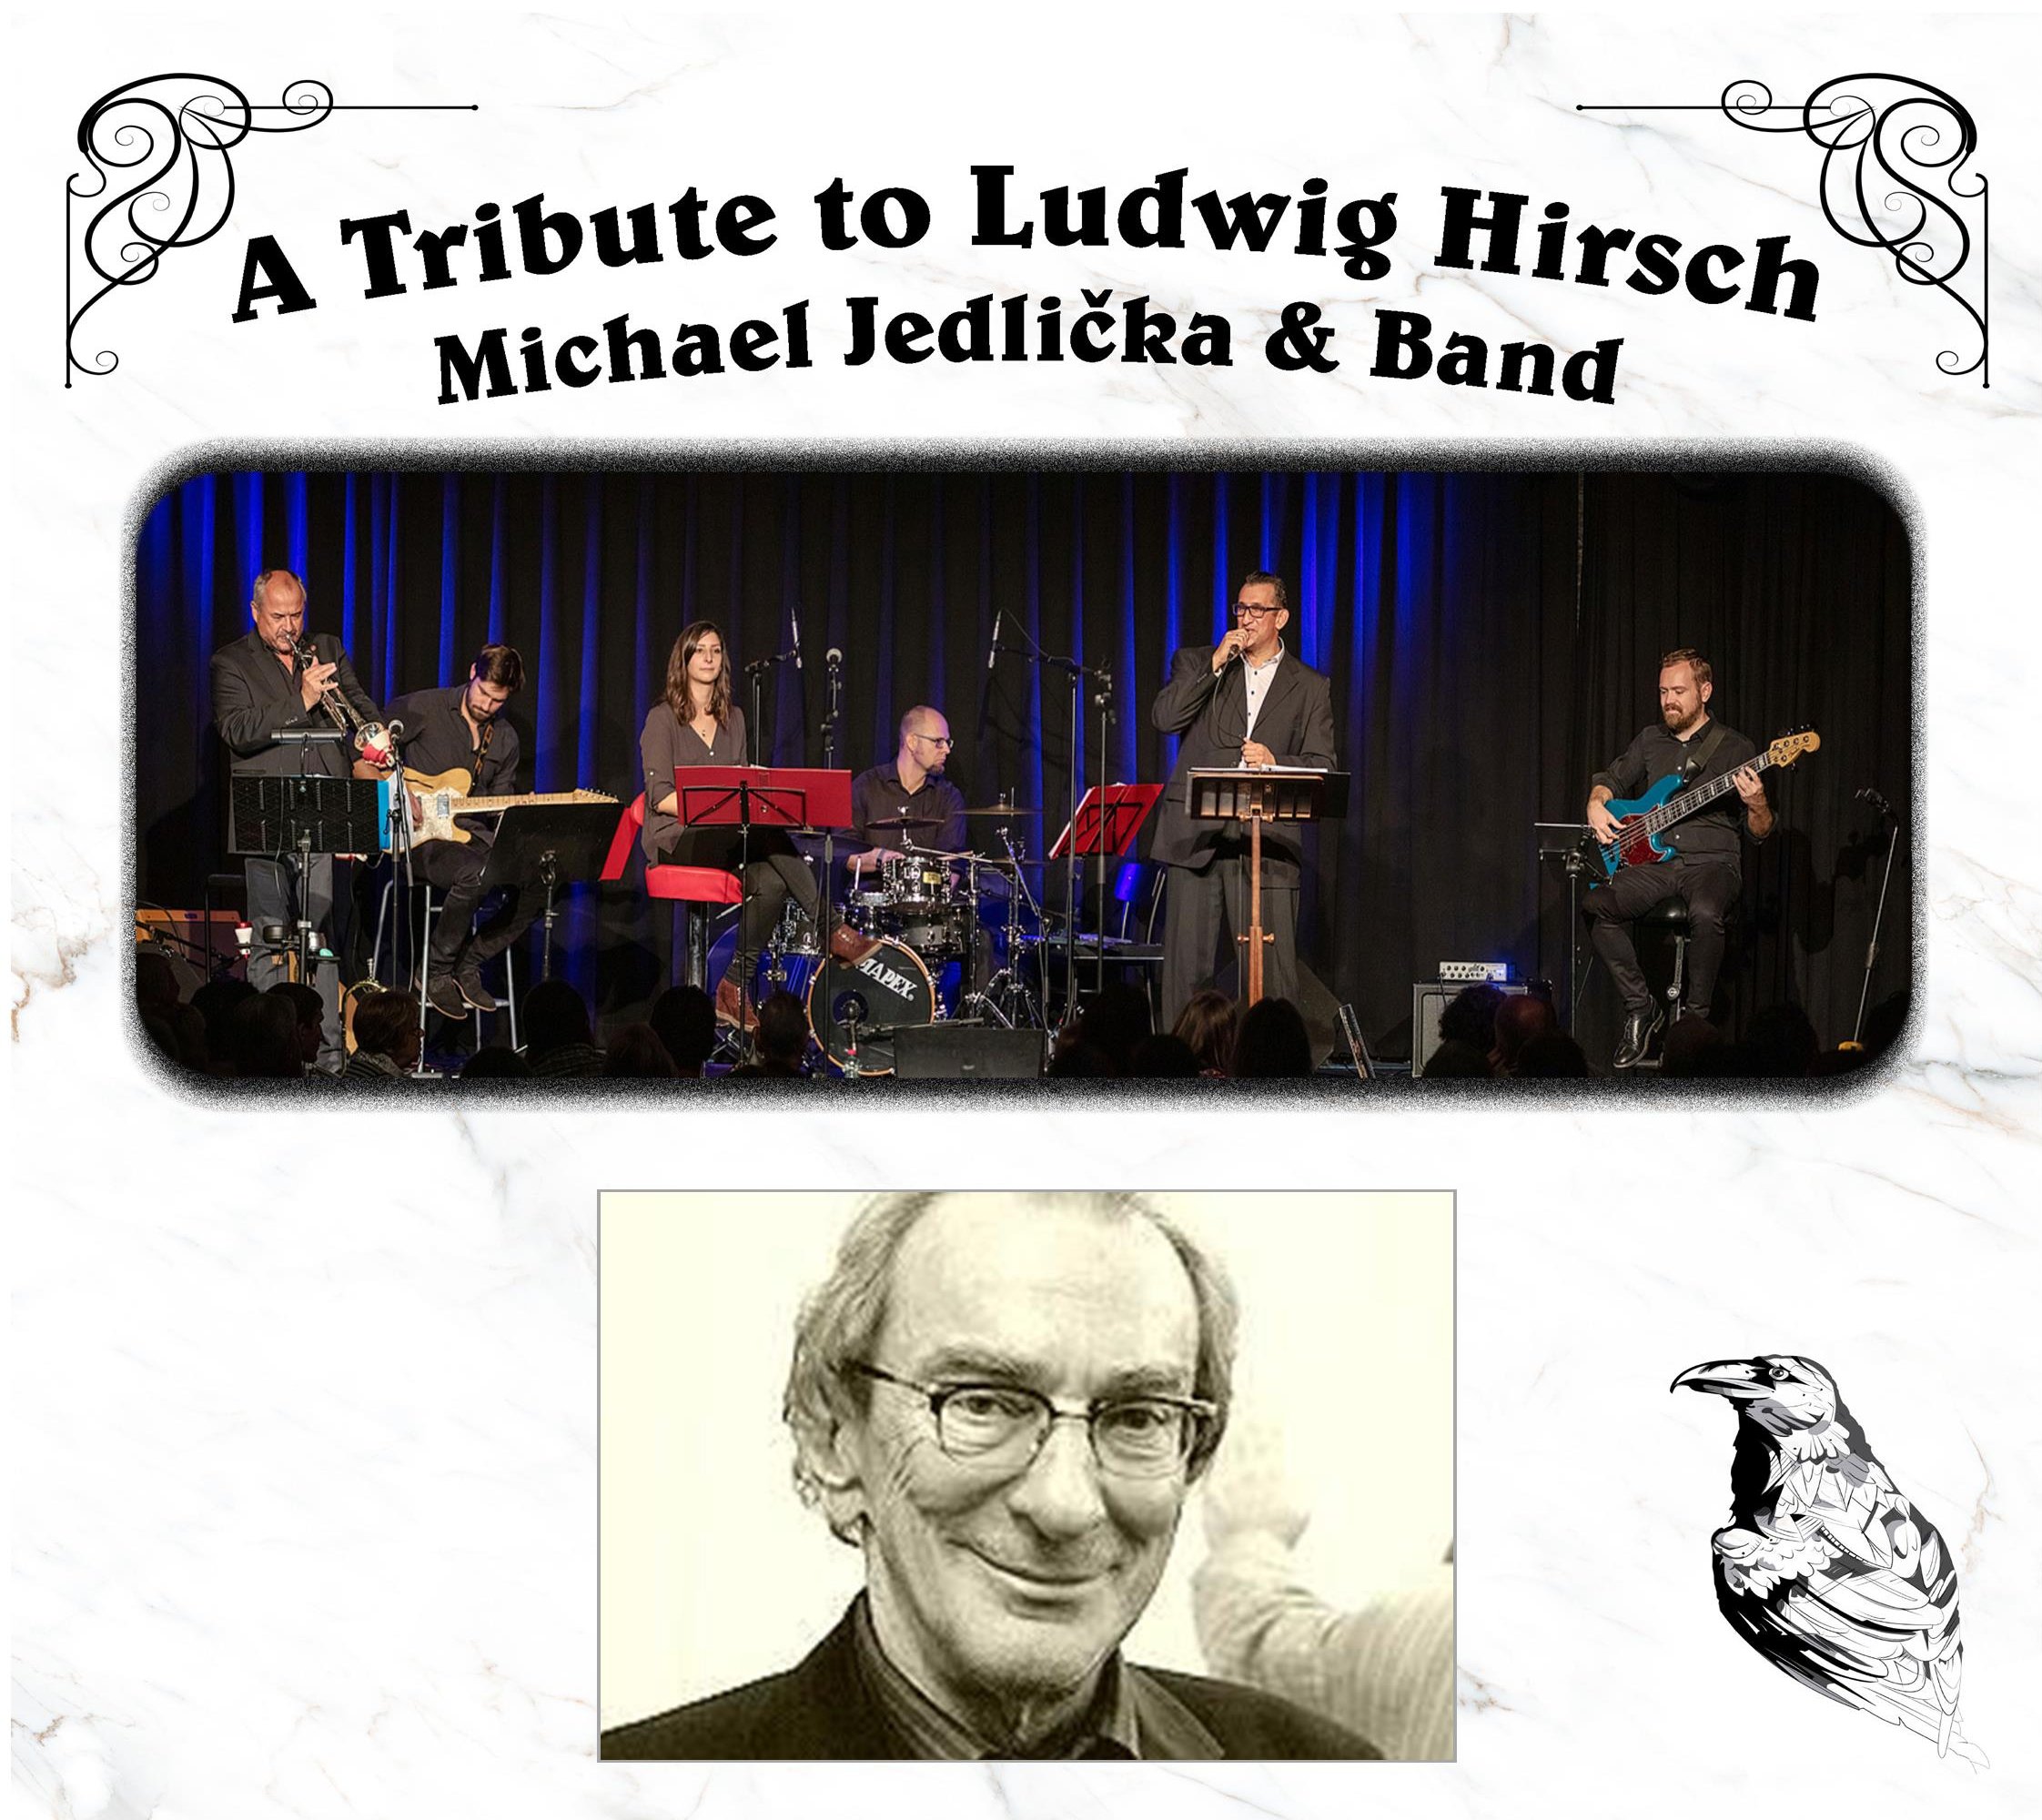 A Tribute to Ludwig Hirsch